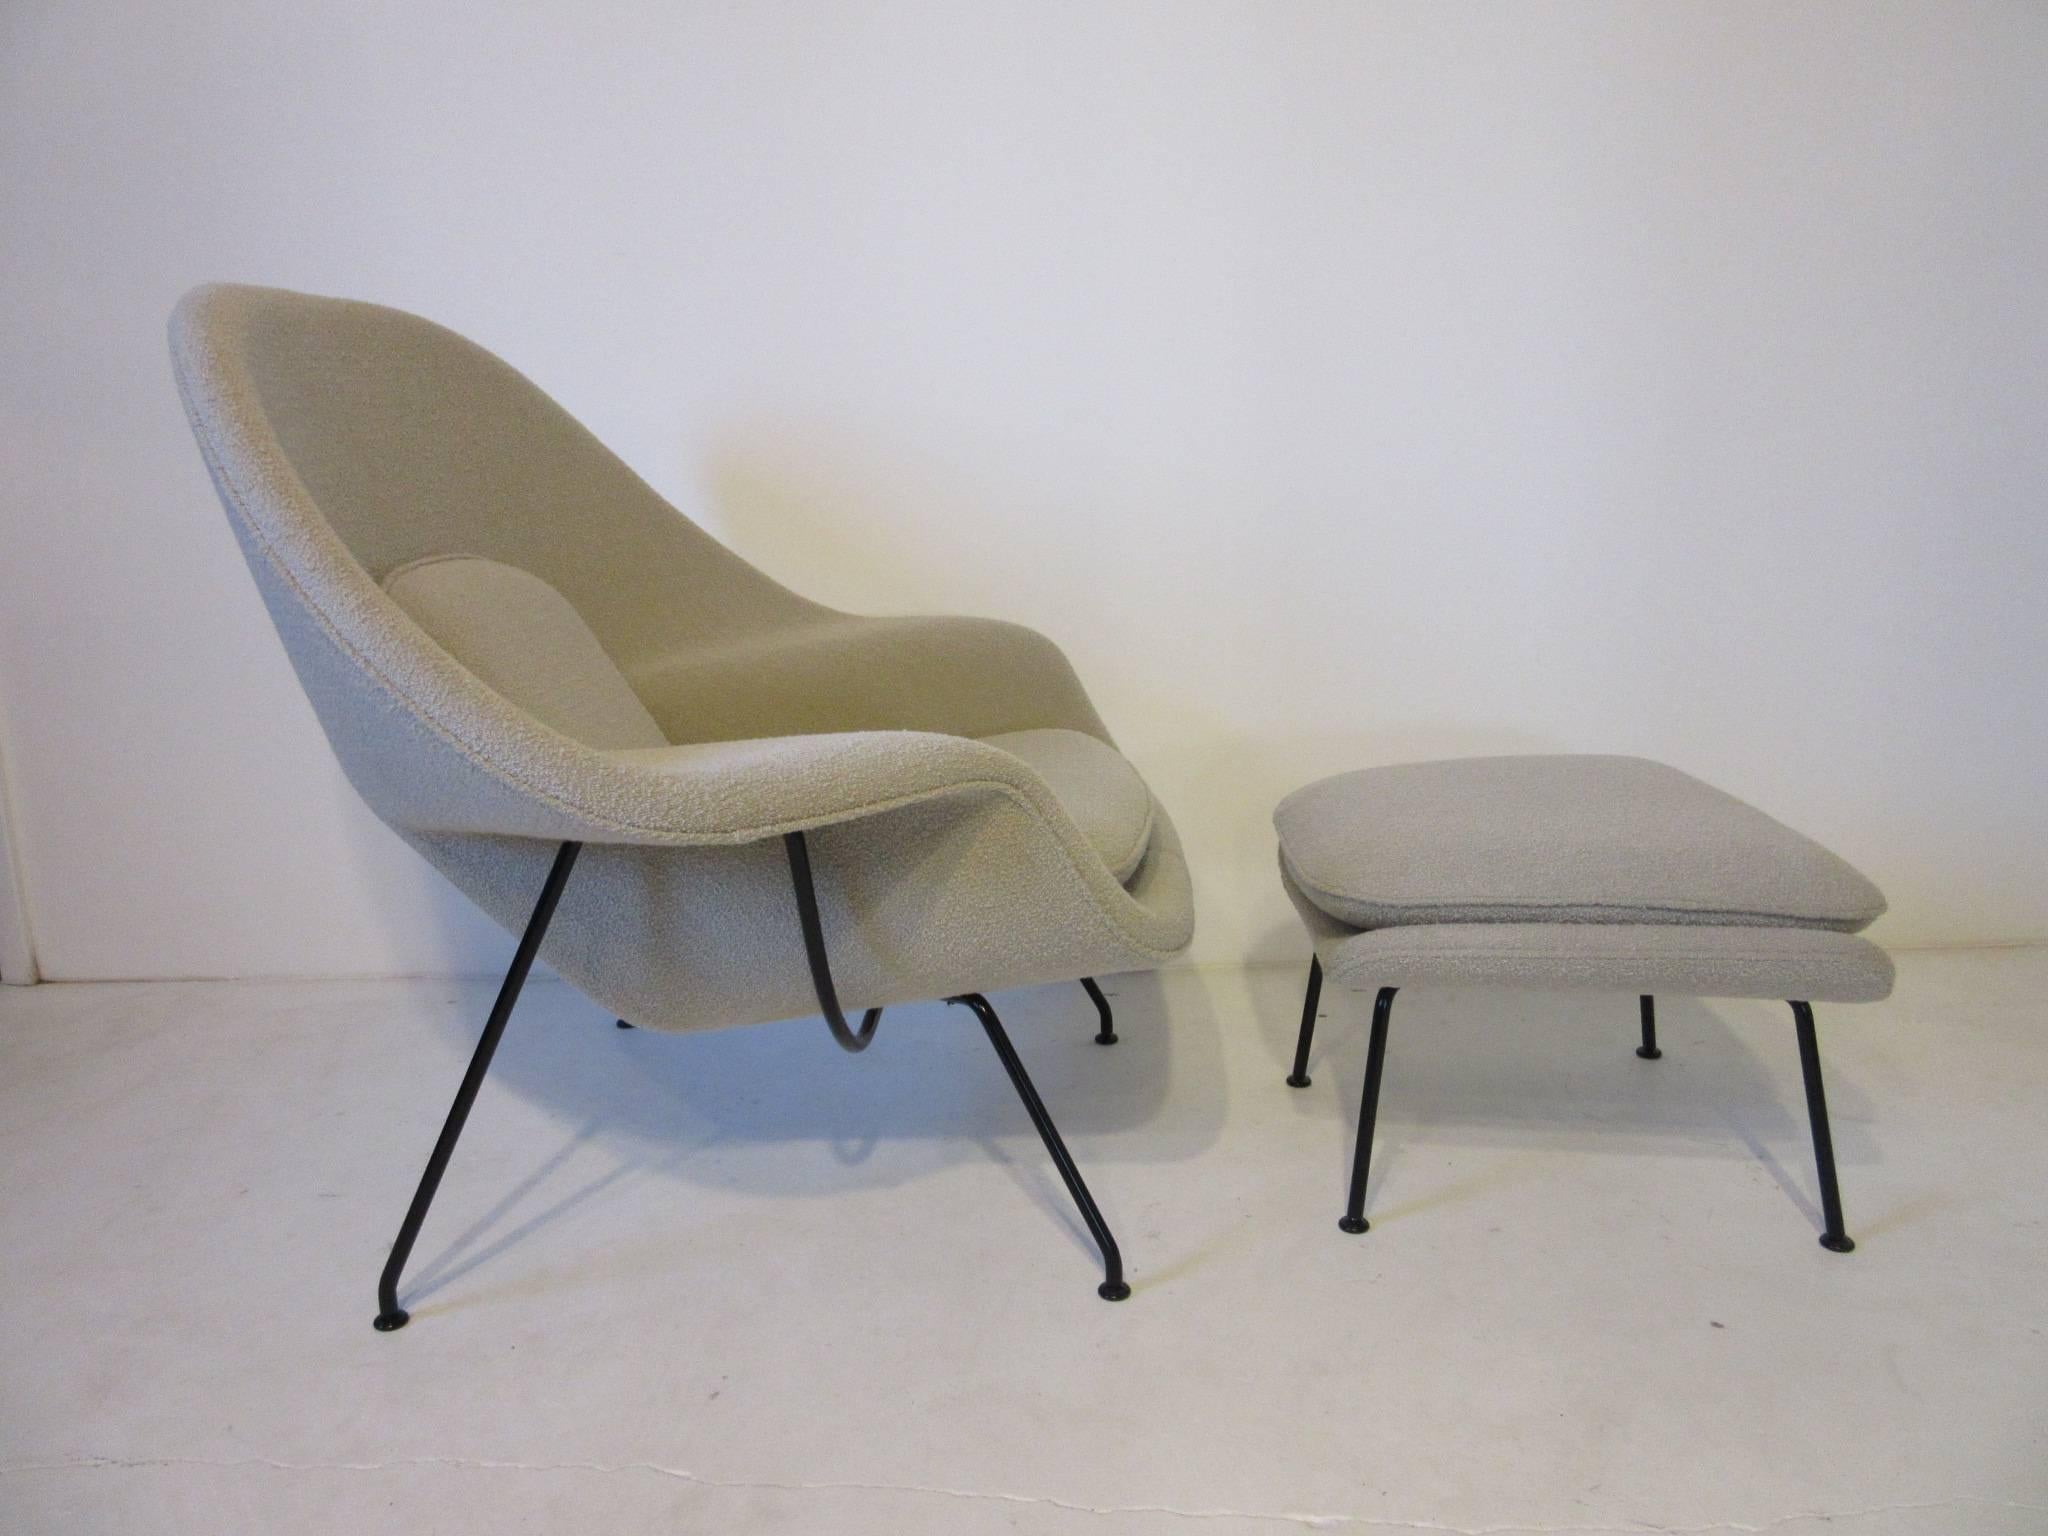 A wonderful Womb chair with matching ottoman in a nubby beige wool blend fabric with satin black sculptural metal frame. Retains the manufactures tag by the Knoll Furniture company a Classic design that still remains fresh. Ottoman measurement is